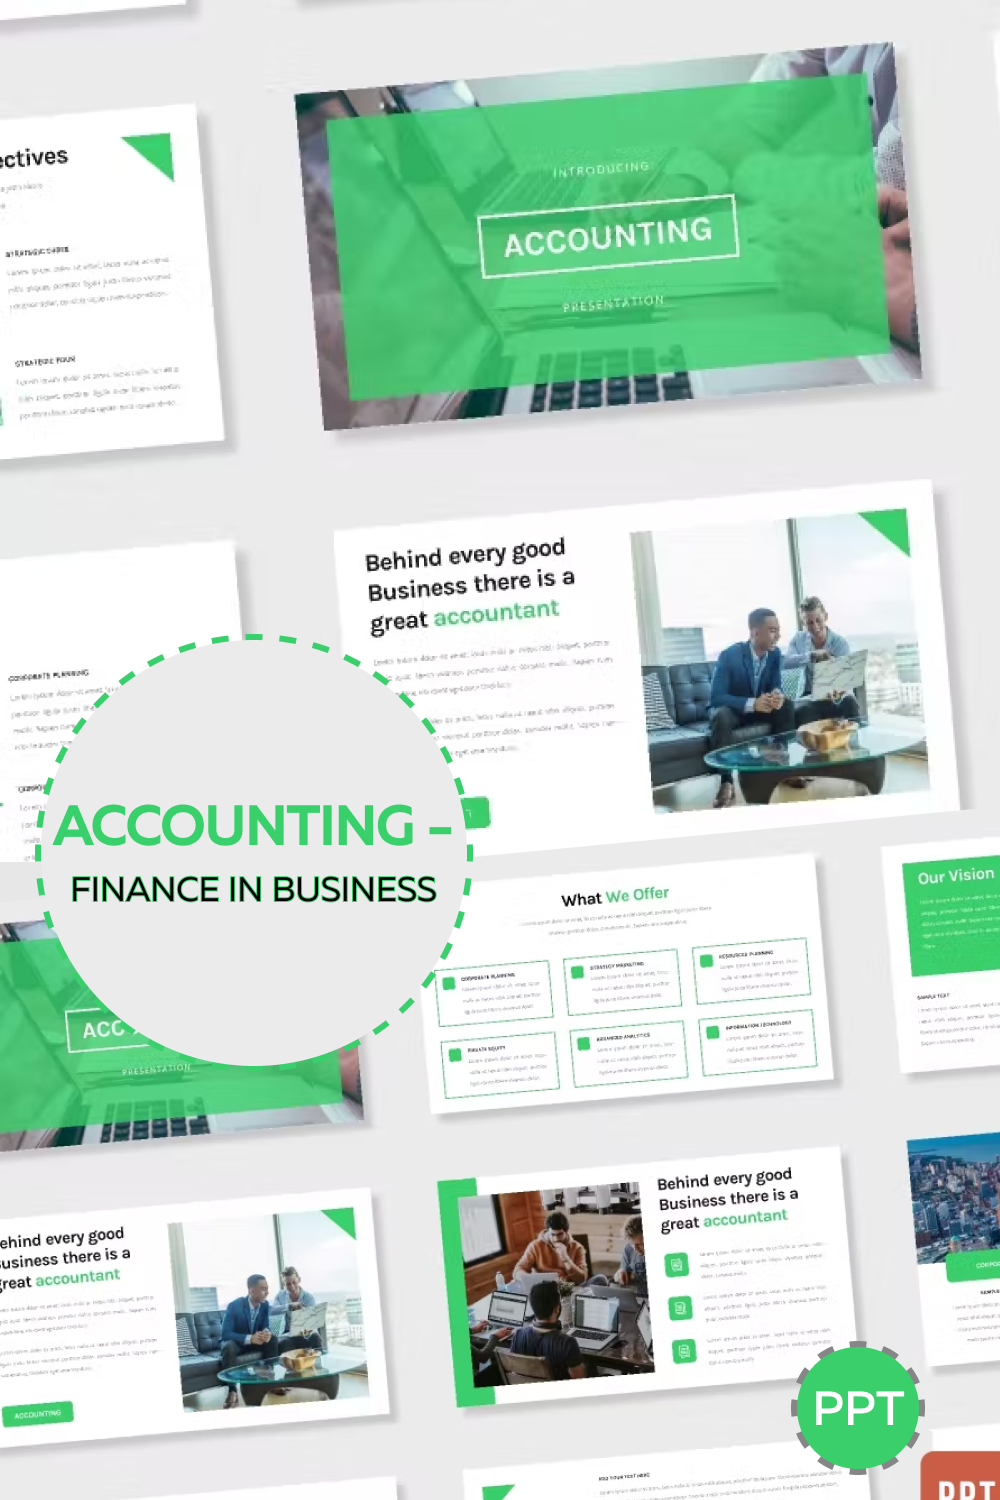 Accounting finance in business of pinterest.